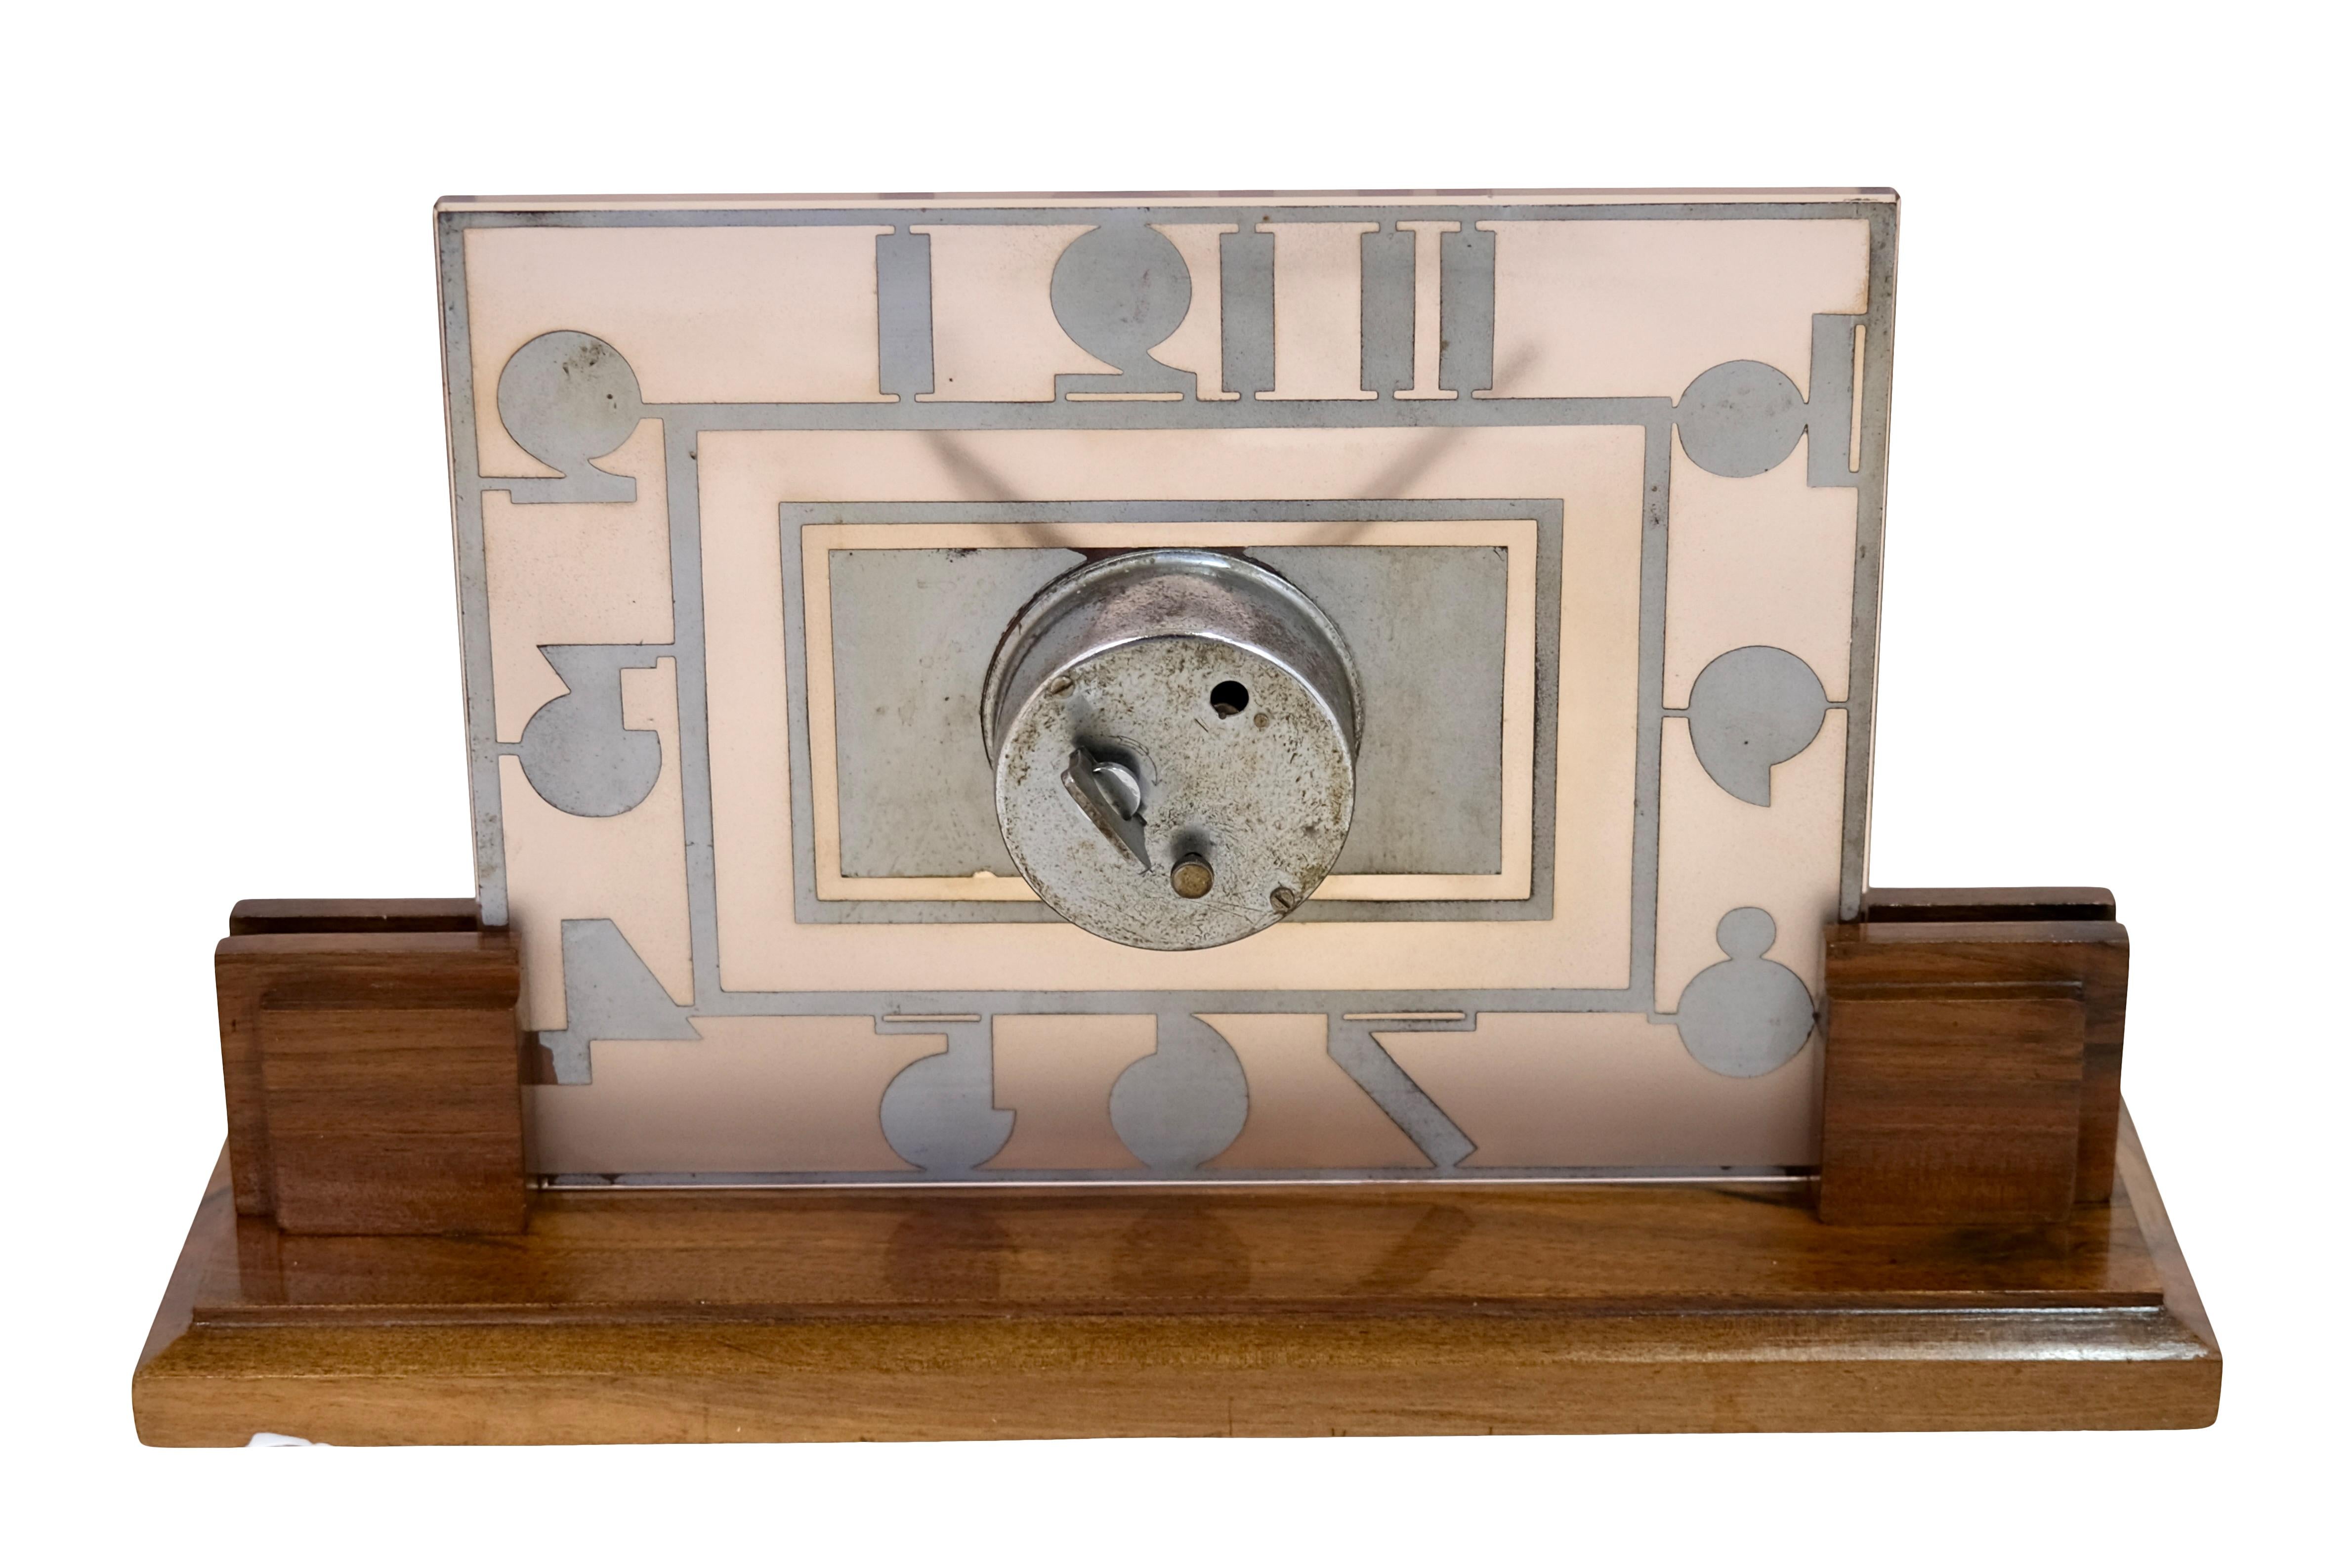 1930s Art Deco Table Clock With Rosaline Glass And Art Deco Typical Numerals In Good Condition For Sale In Ulm, DE